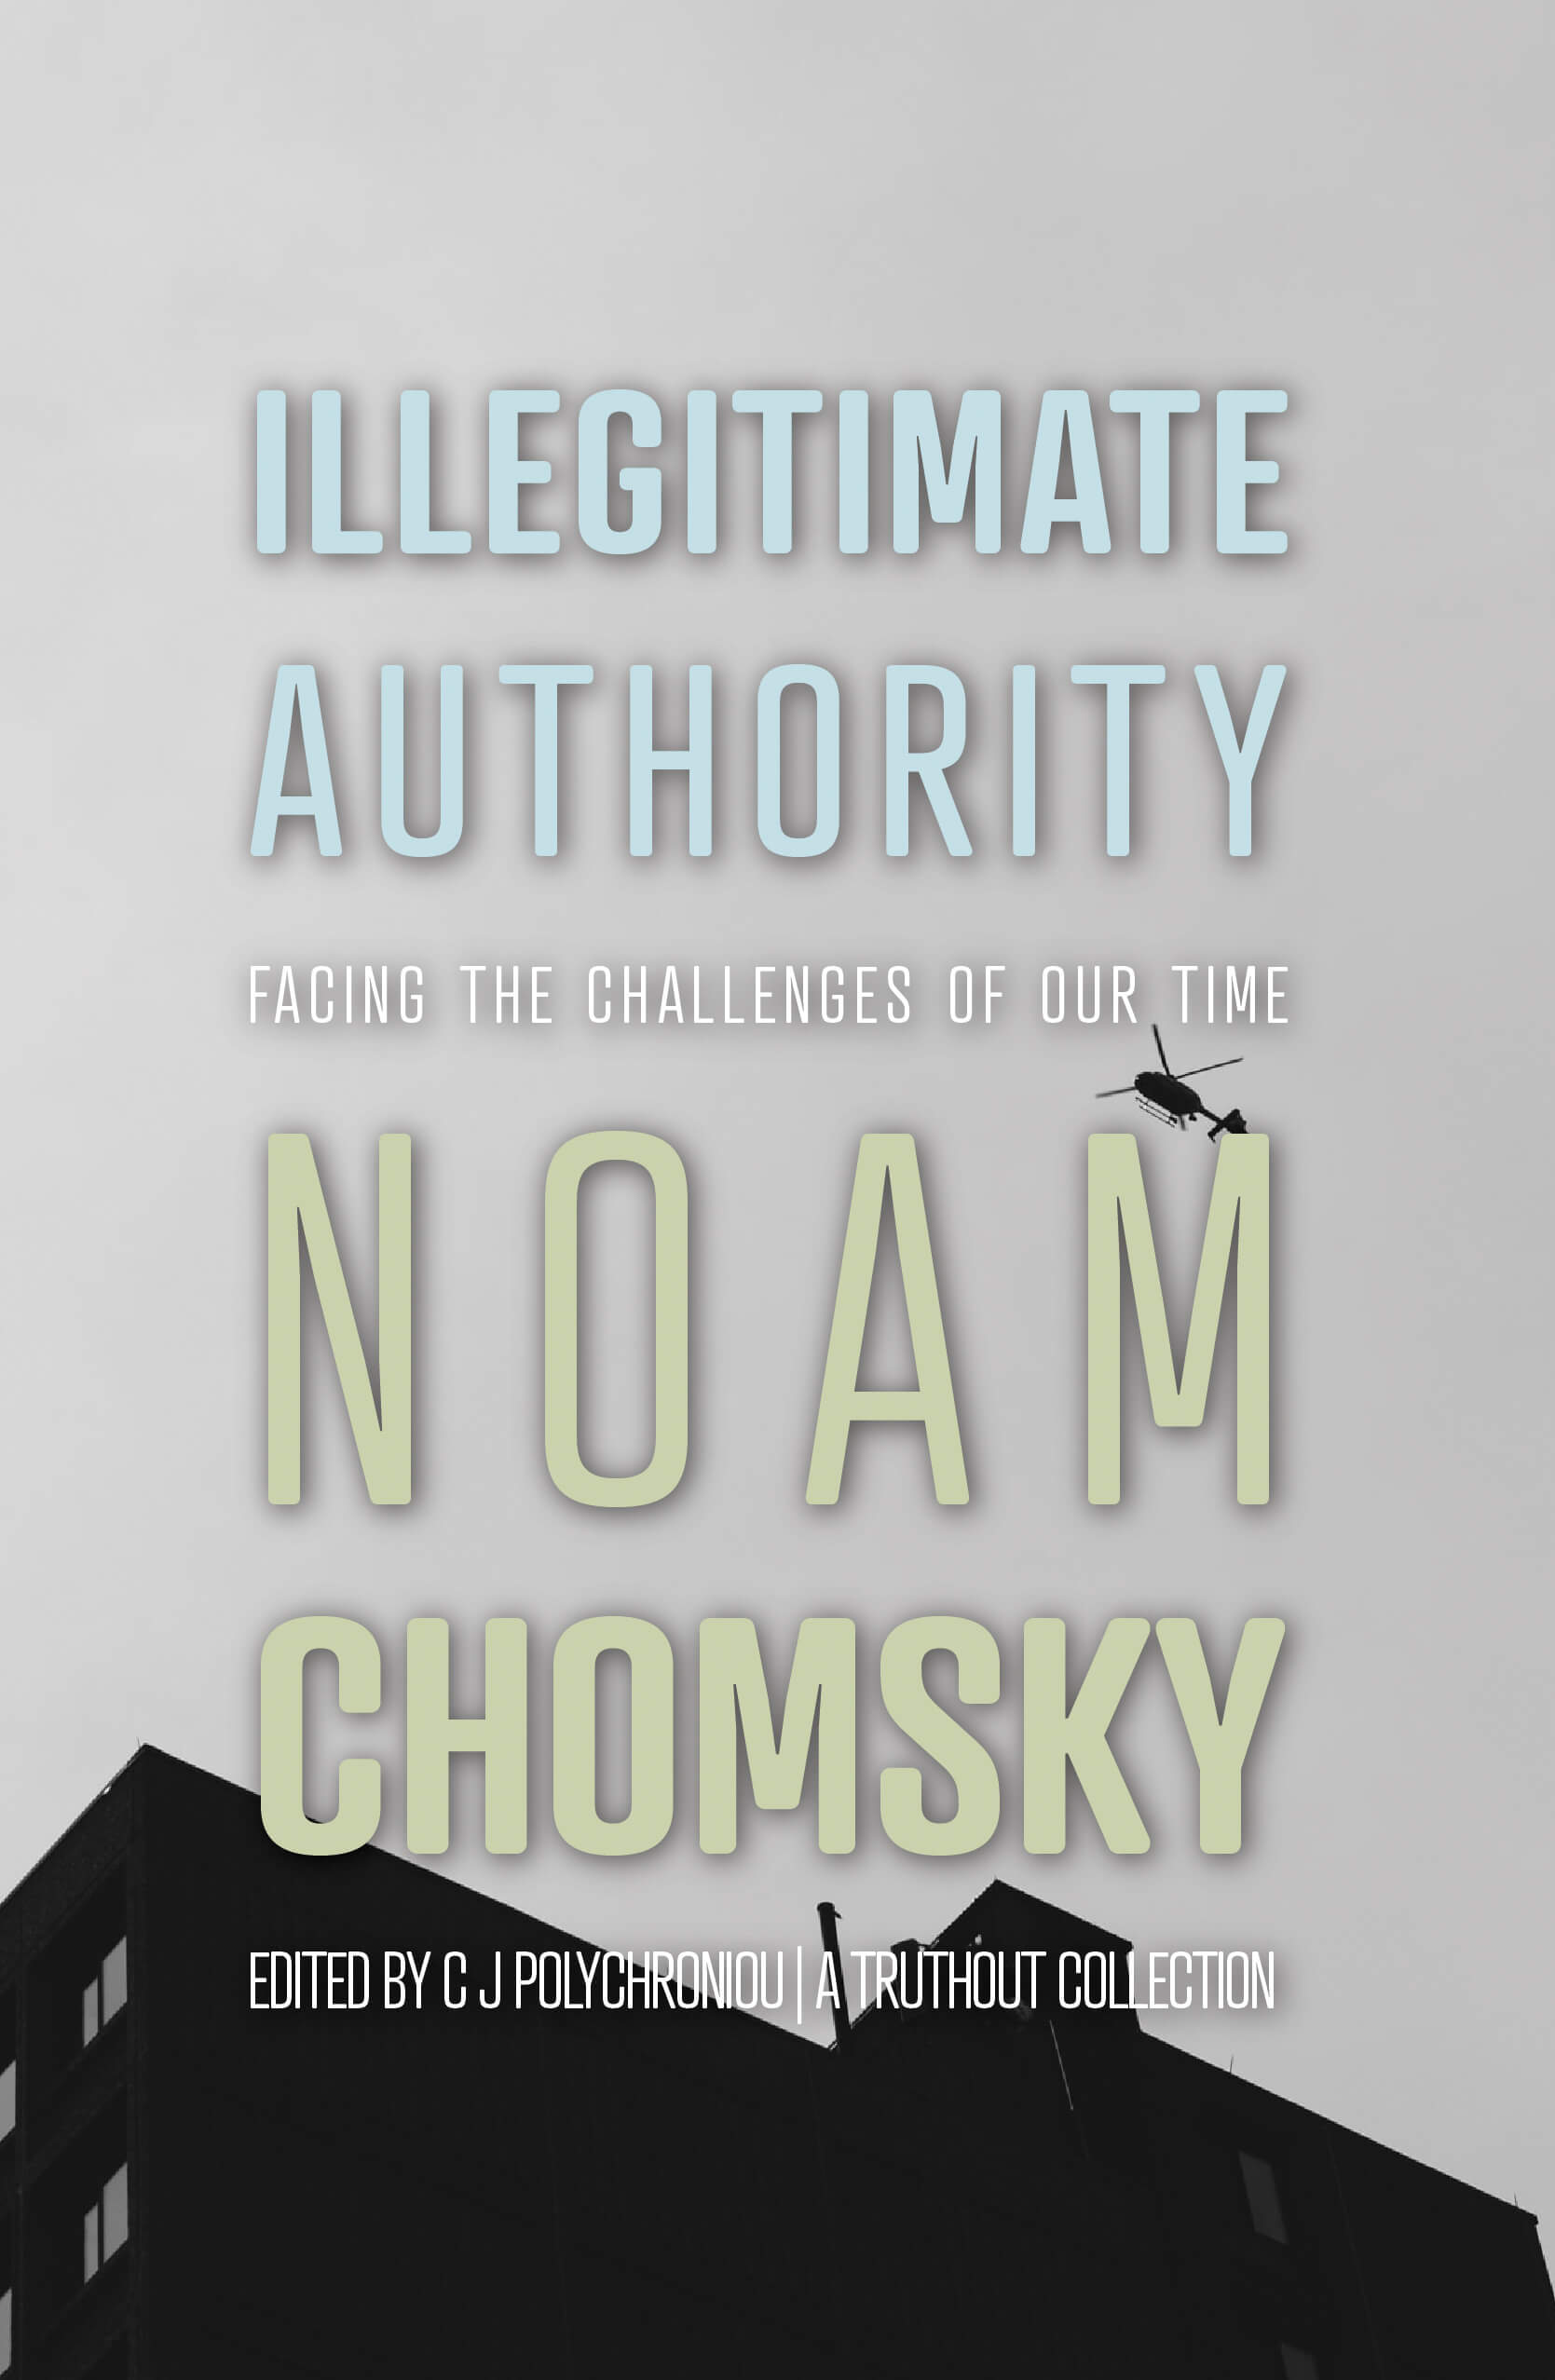 The cover for 'Illegitimate Authority: Facing the Challenges of Our Time'.